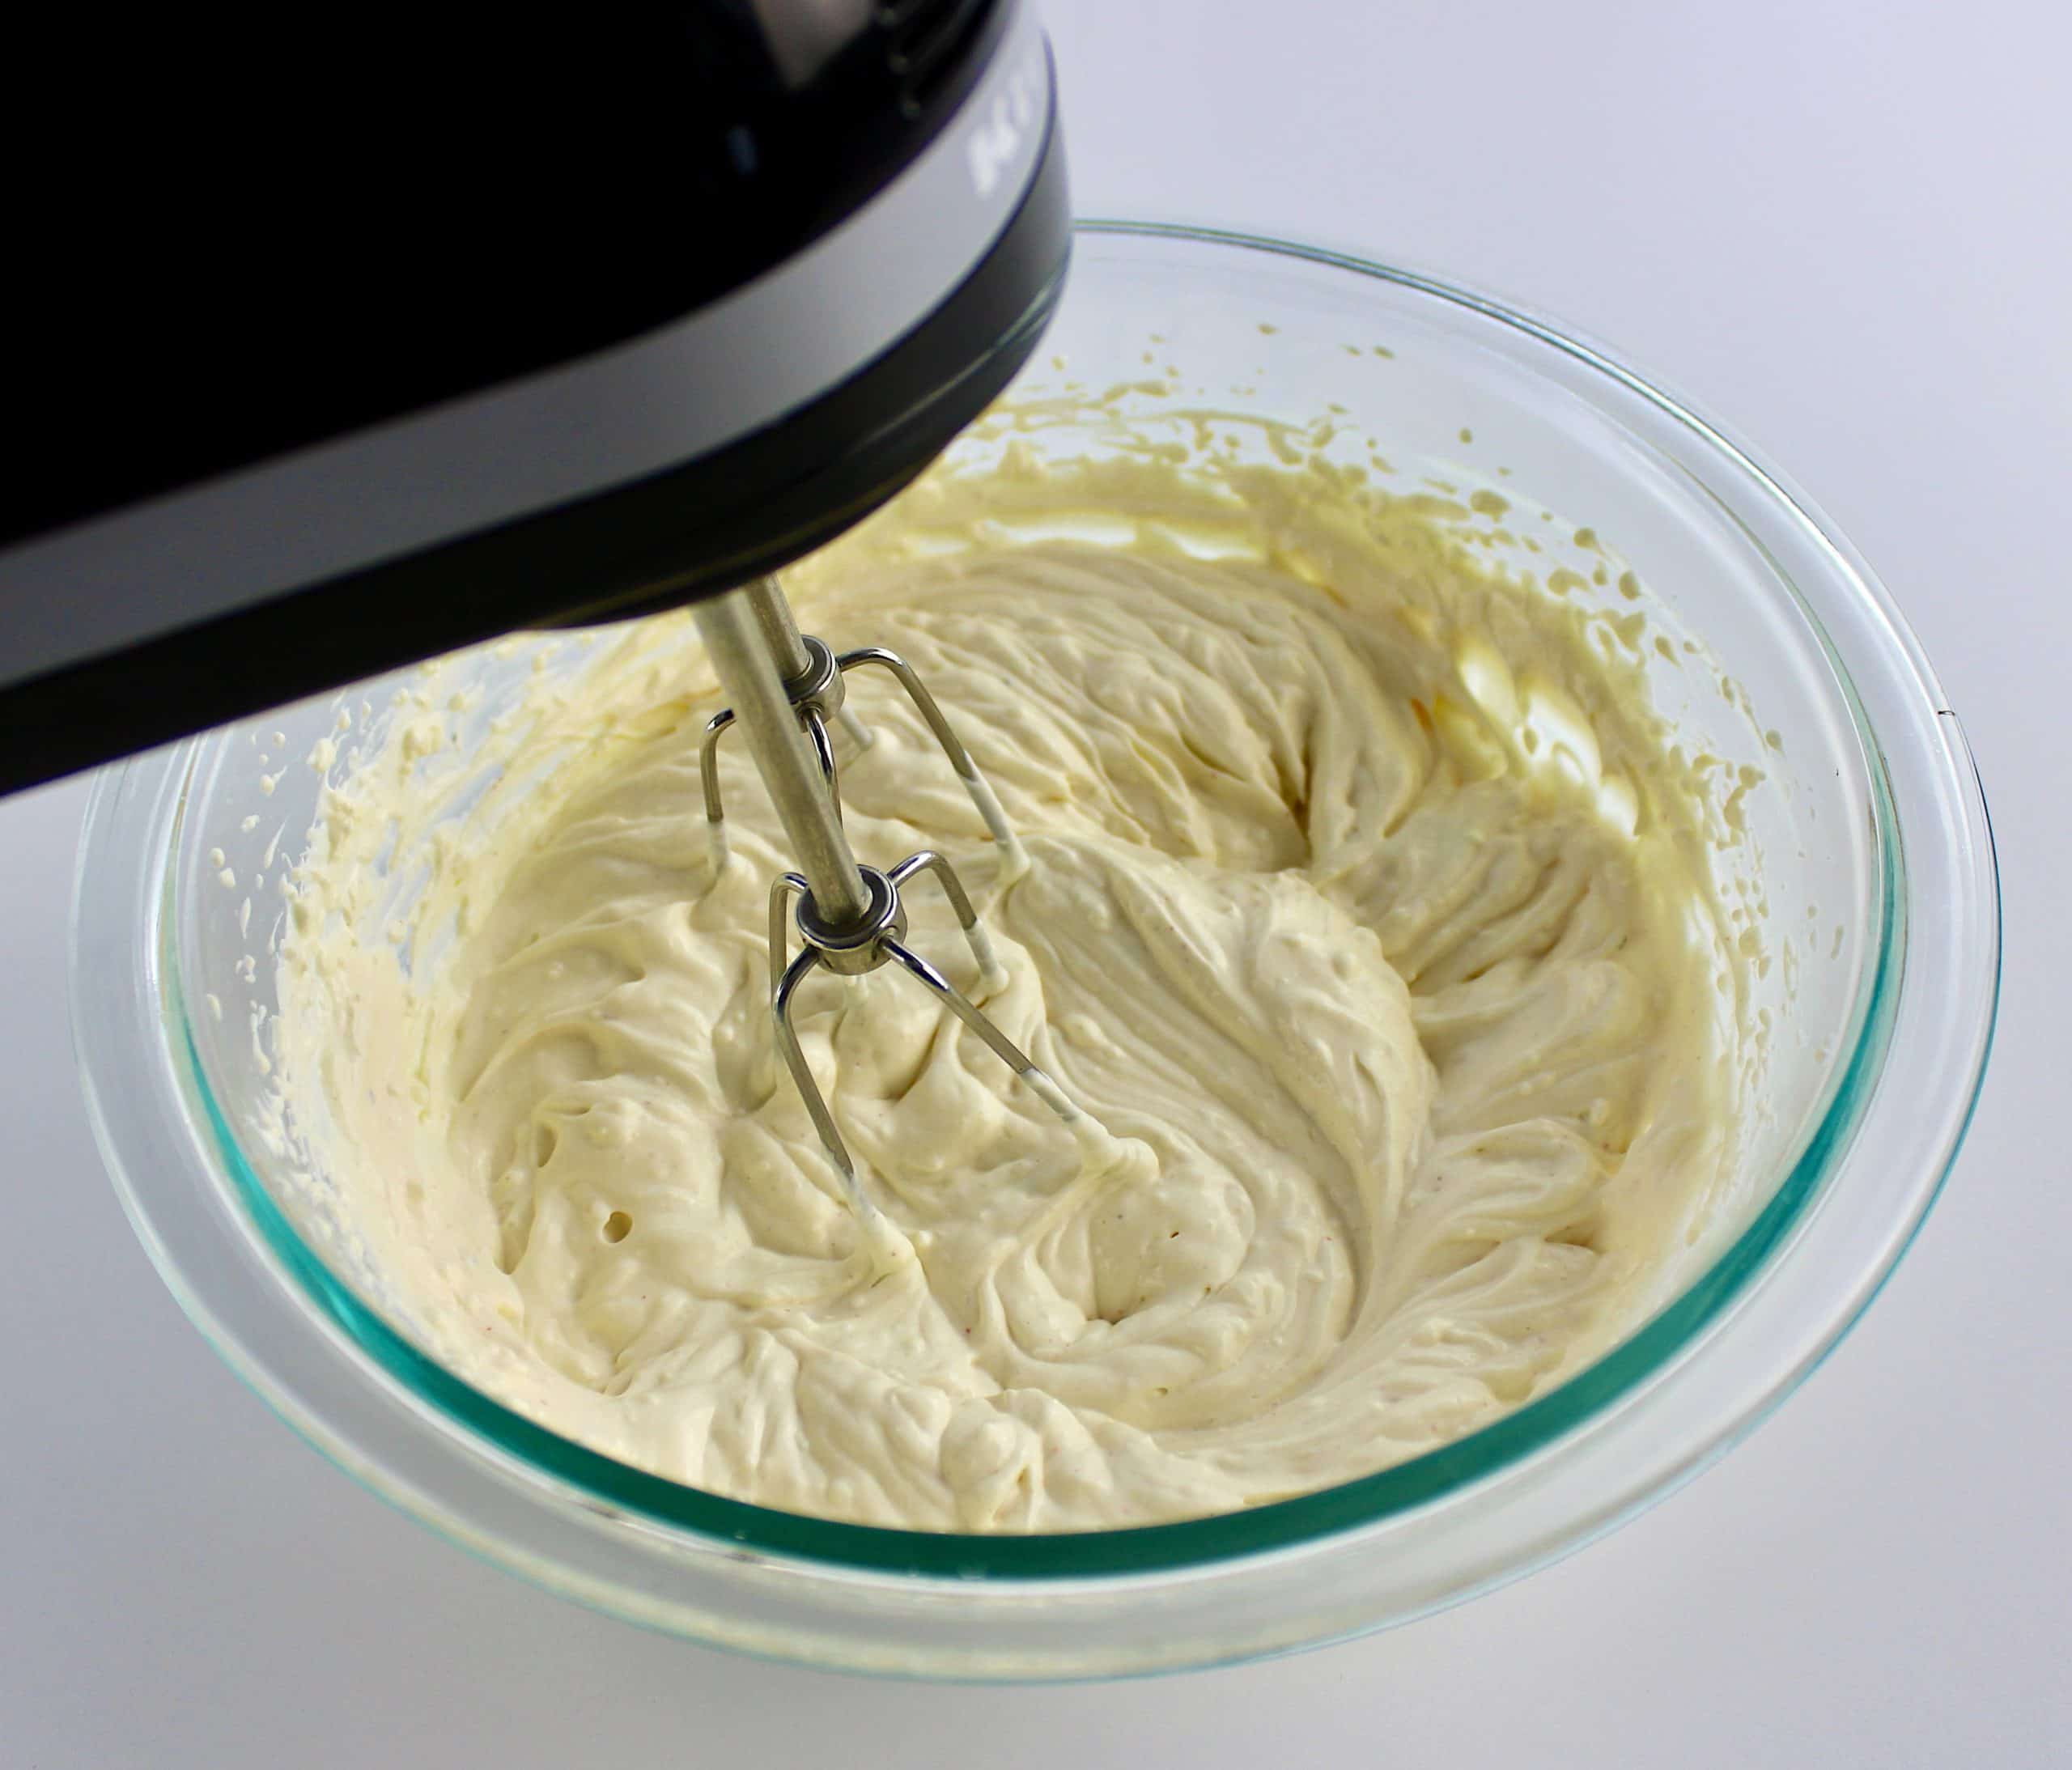 sour cream cream cheese and chipotle being mixed with hand mixer inn glass bowl